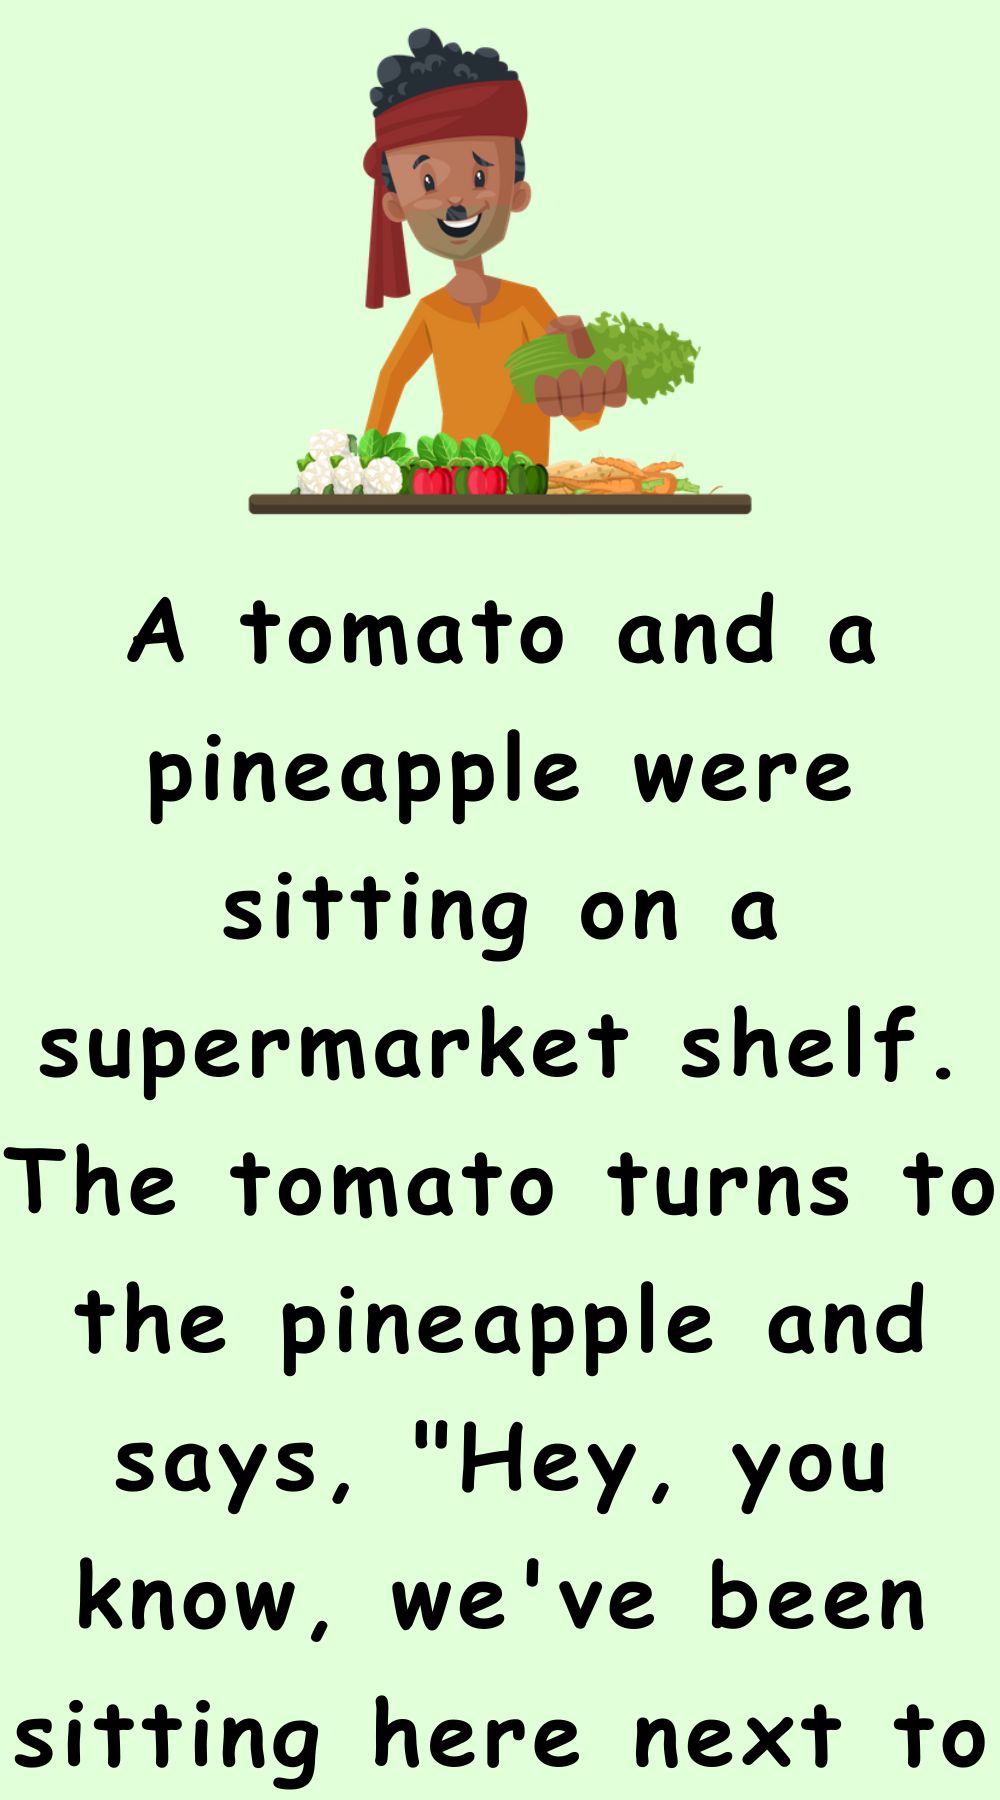 A tomato and a pineapple were sitting on a supermarket